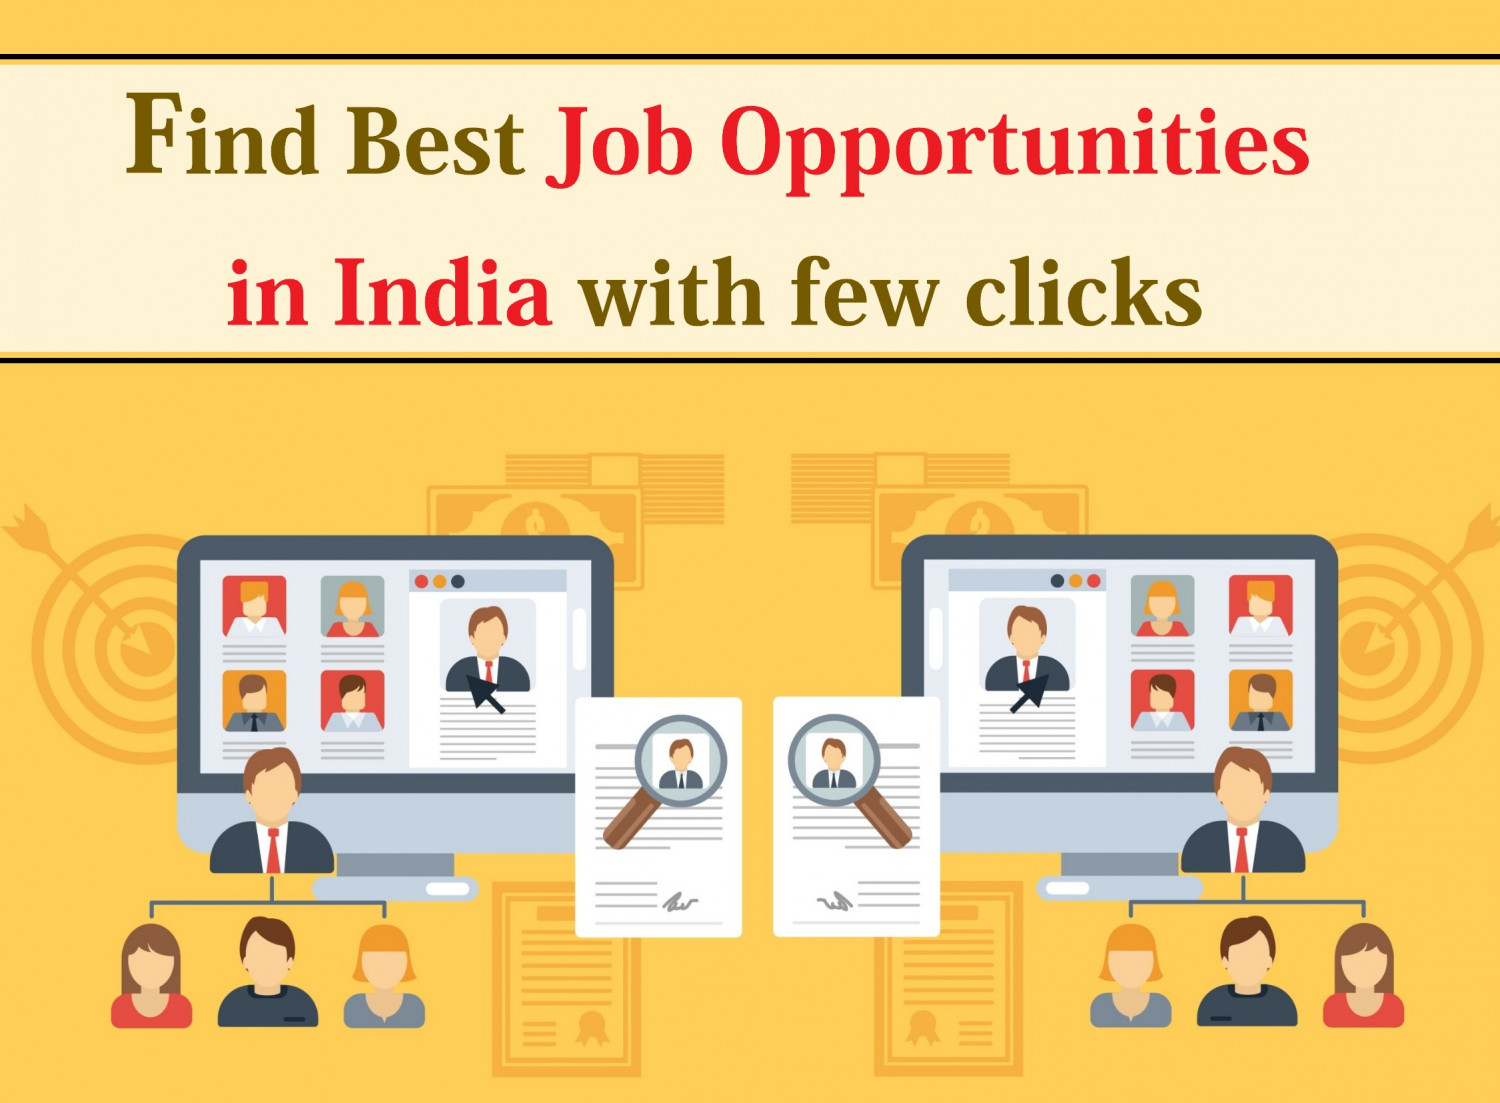 Find Best Job Opportunities in India with few clicks Infographic